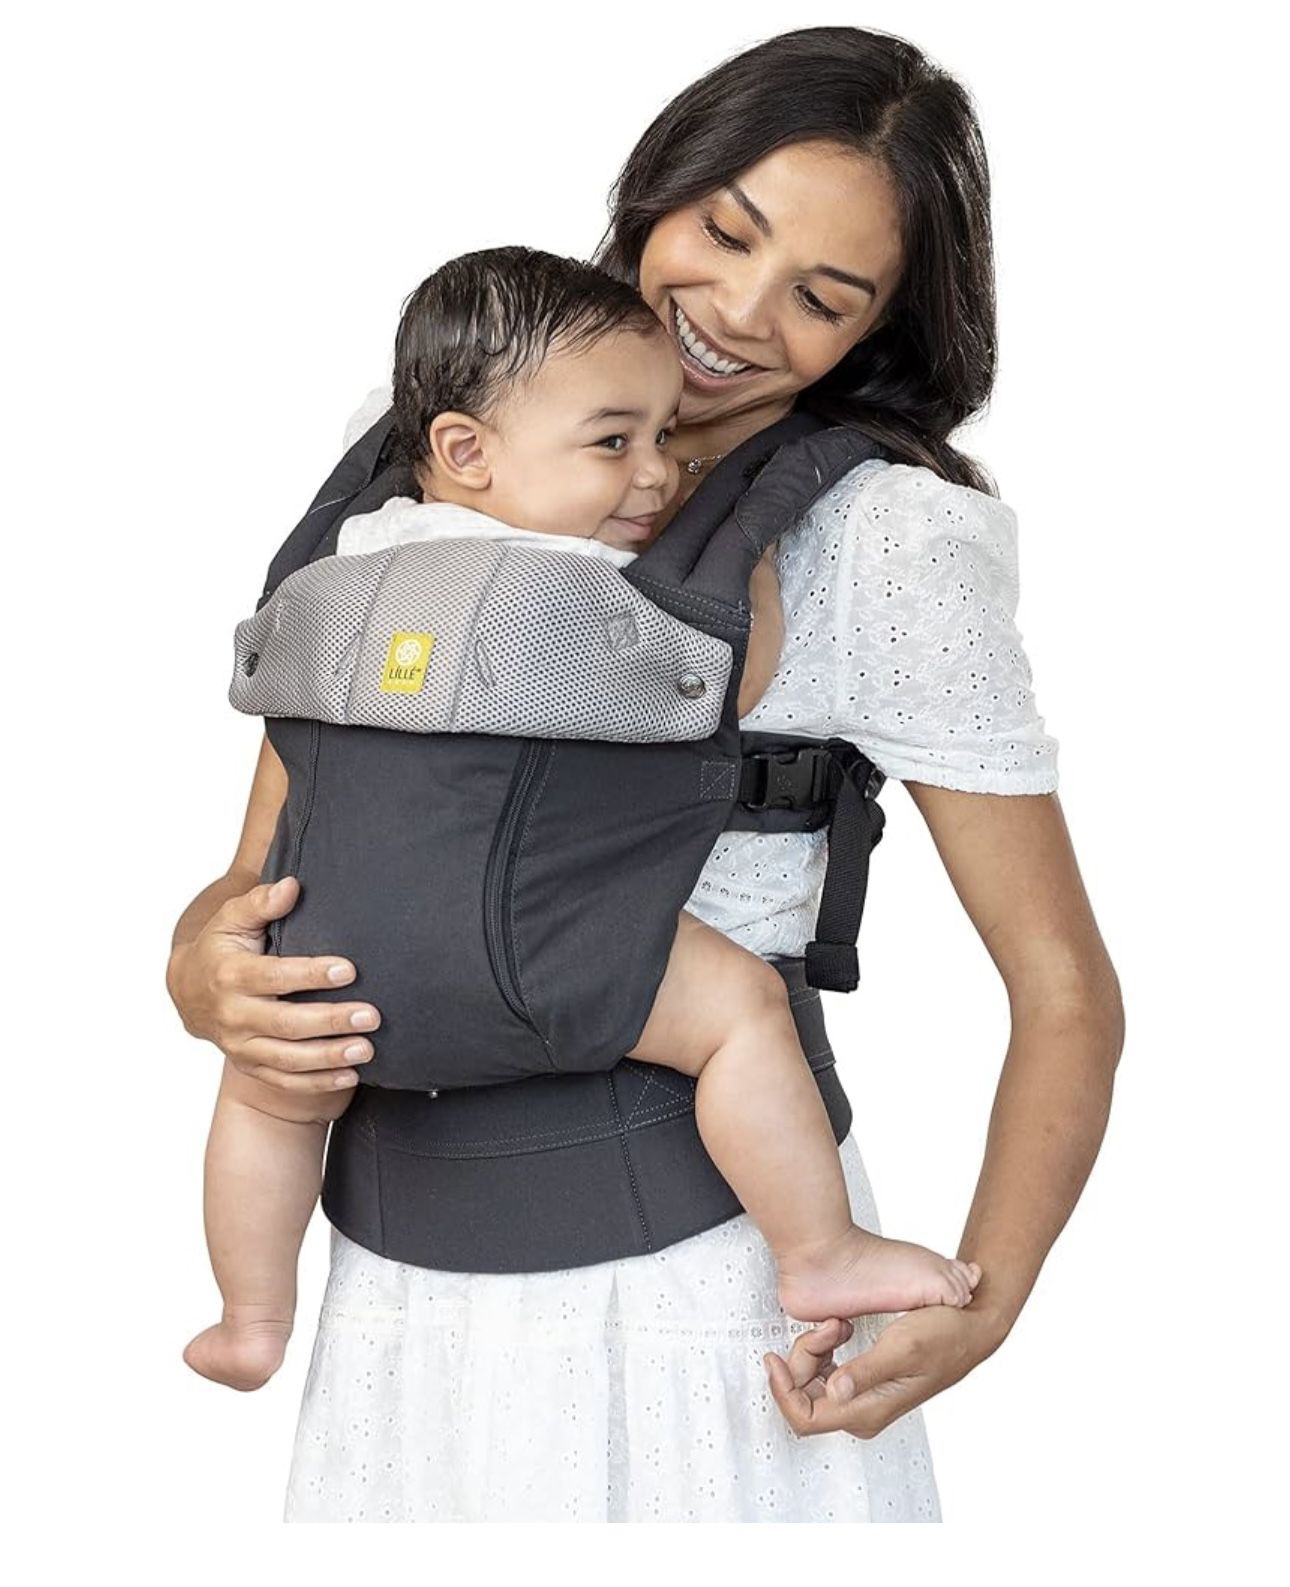 LÍLLÉbaby Complete All Seasons Ergonomic 6-in-1 Baby Carrier Newborn to Toddler - with Lumbar Support - for Children 7-45 Pounds - 360 Degree Baby Wea